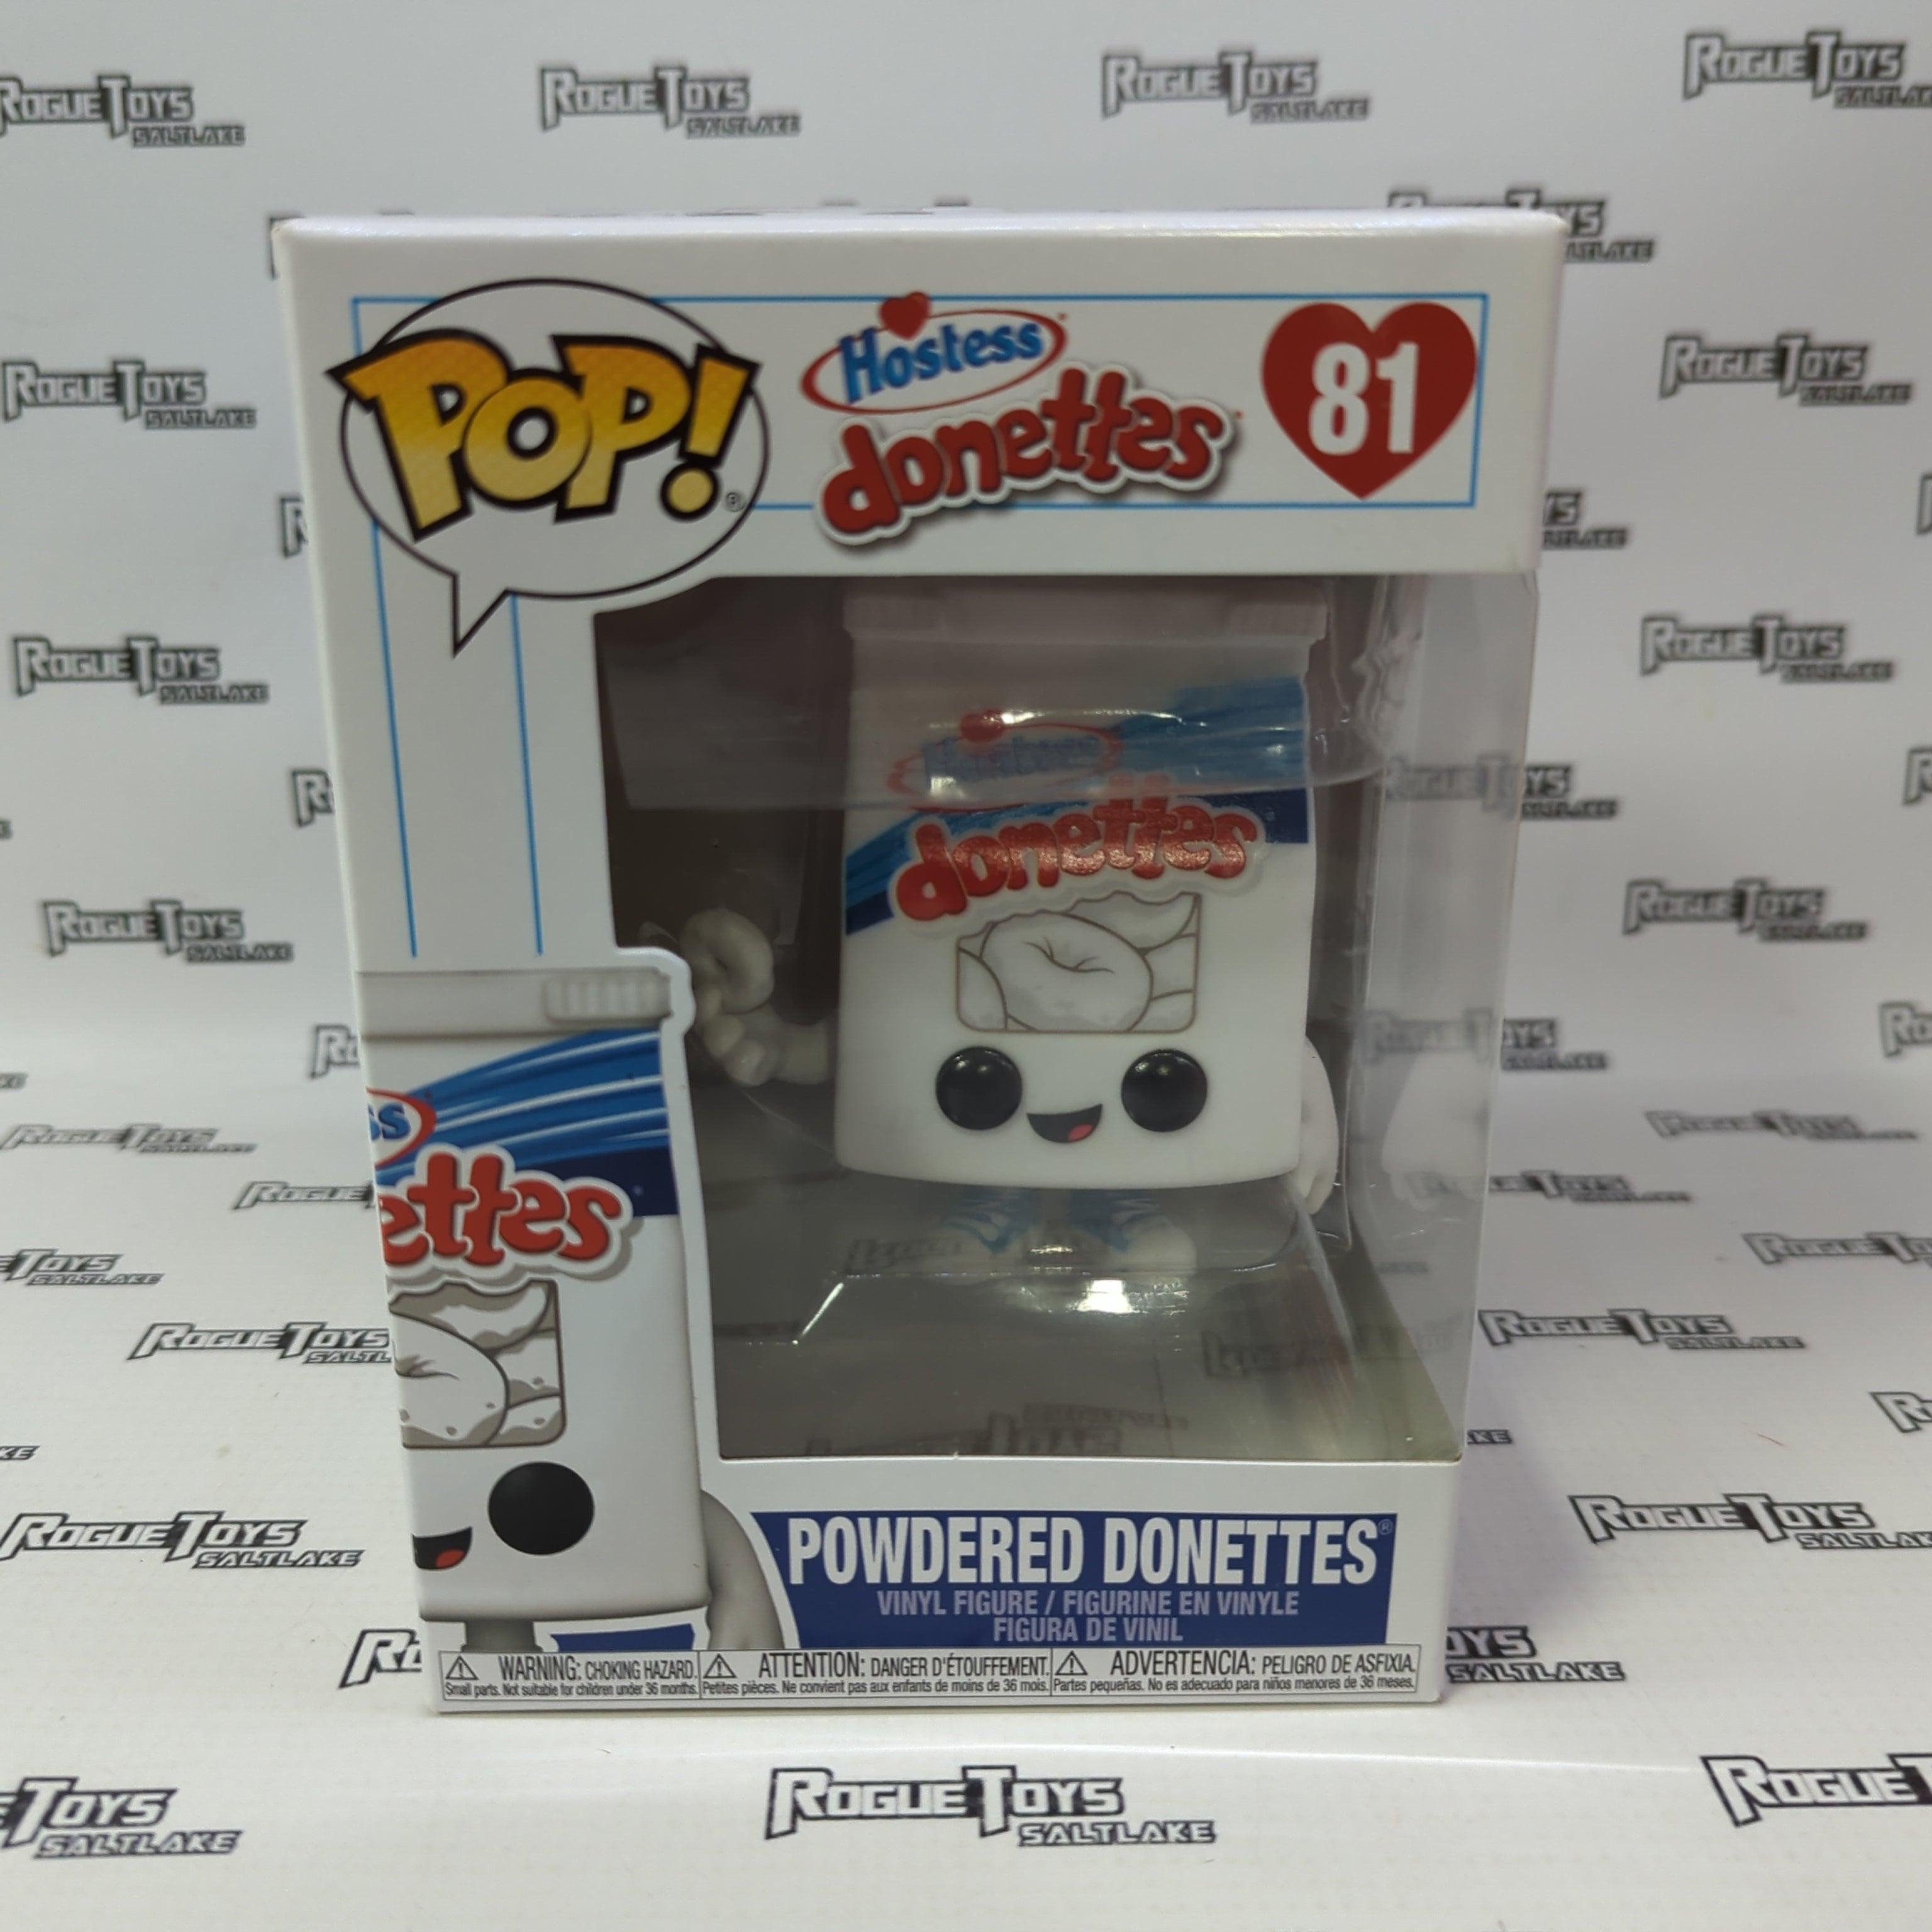 Funko POP! Hostess Powdered Donettes 81 - Rogue Toys